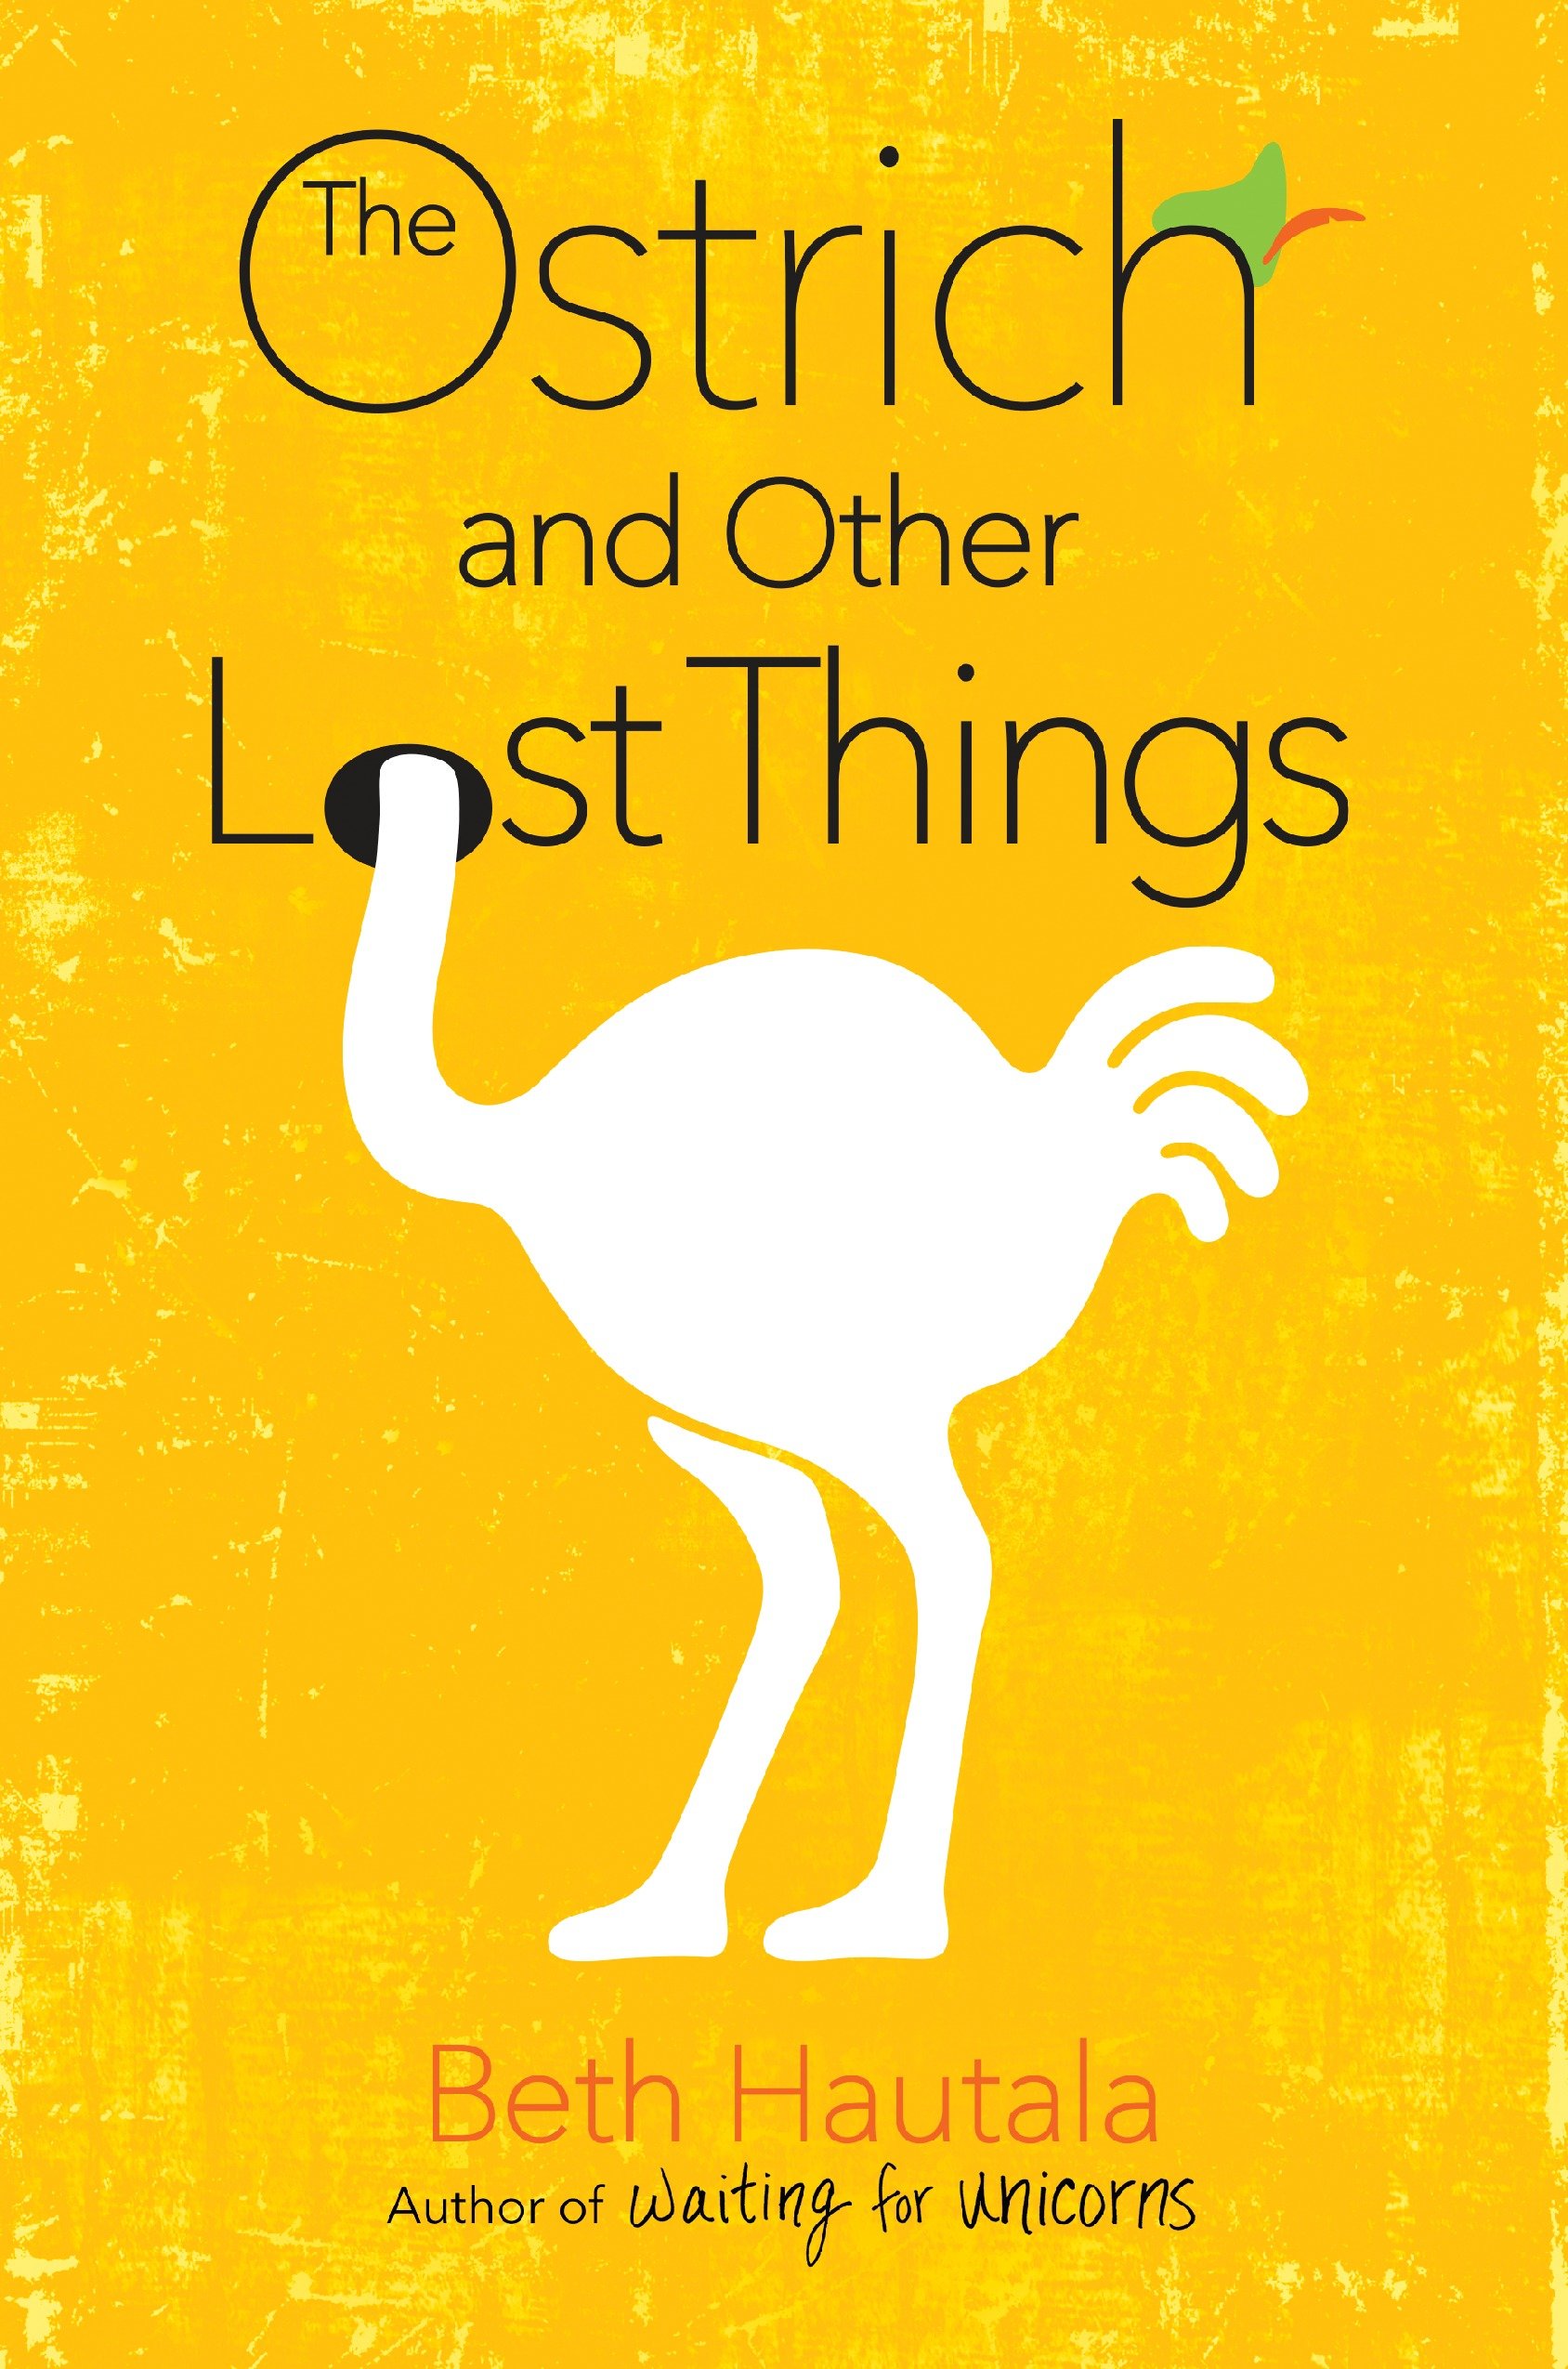 The ostrich and other lost things cover image